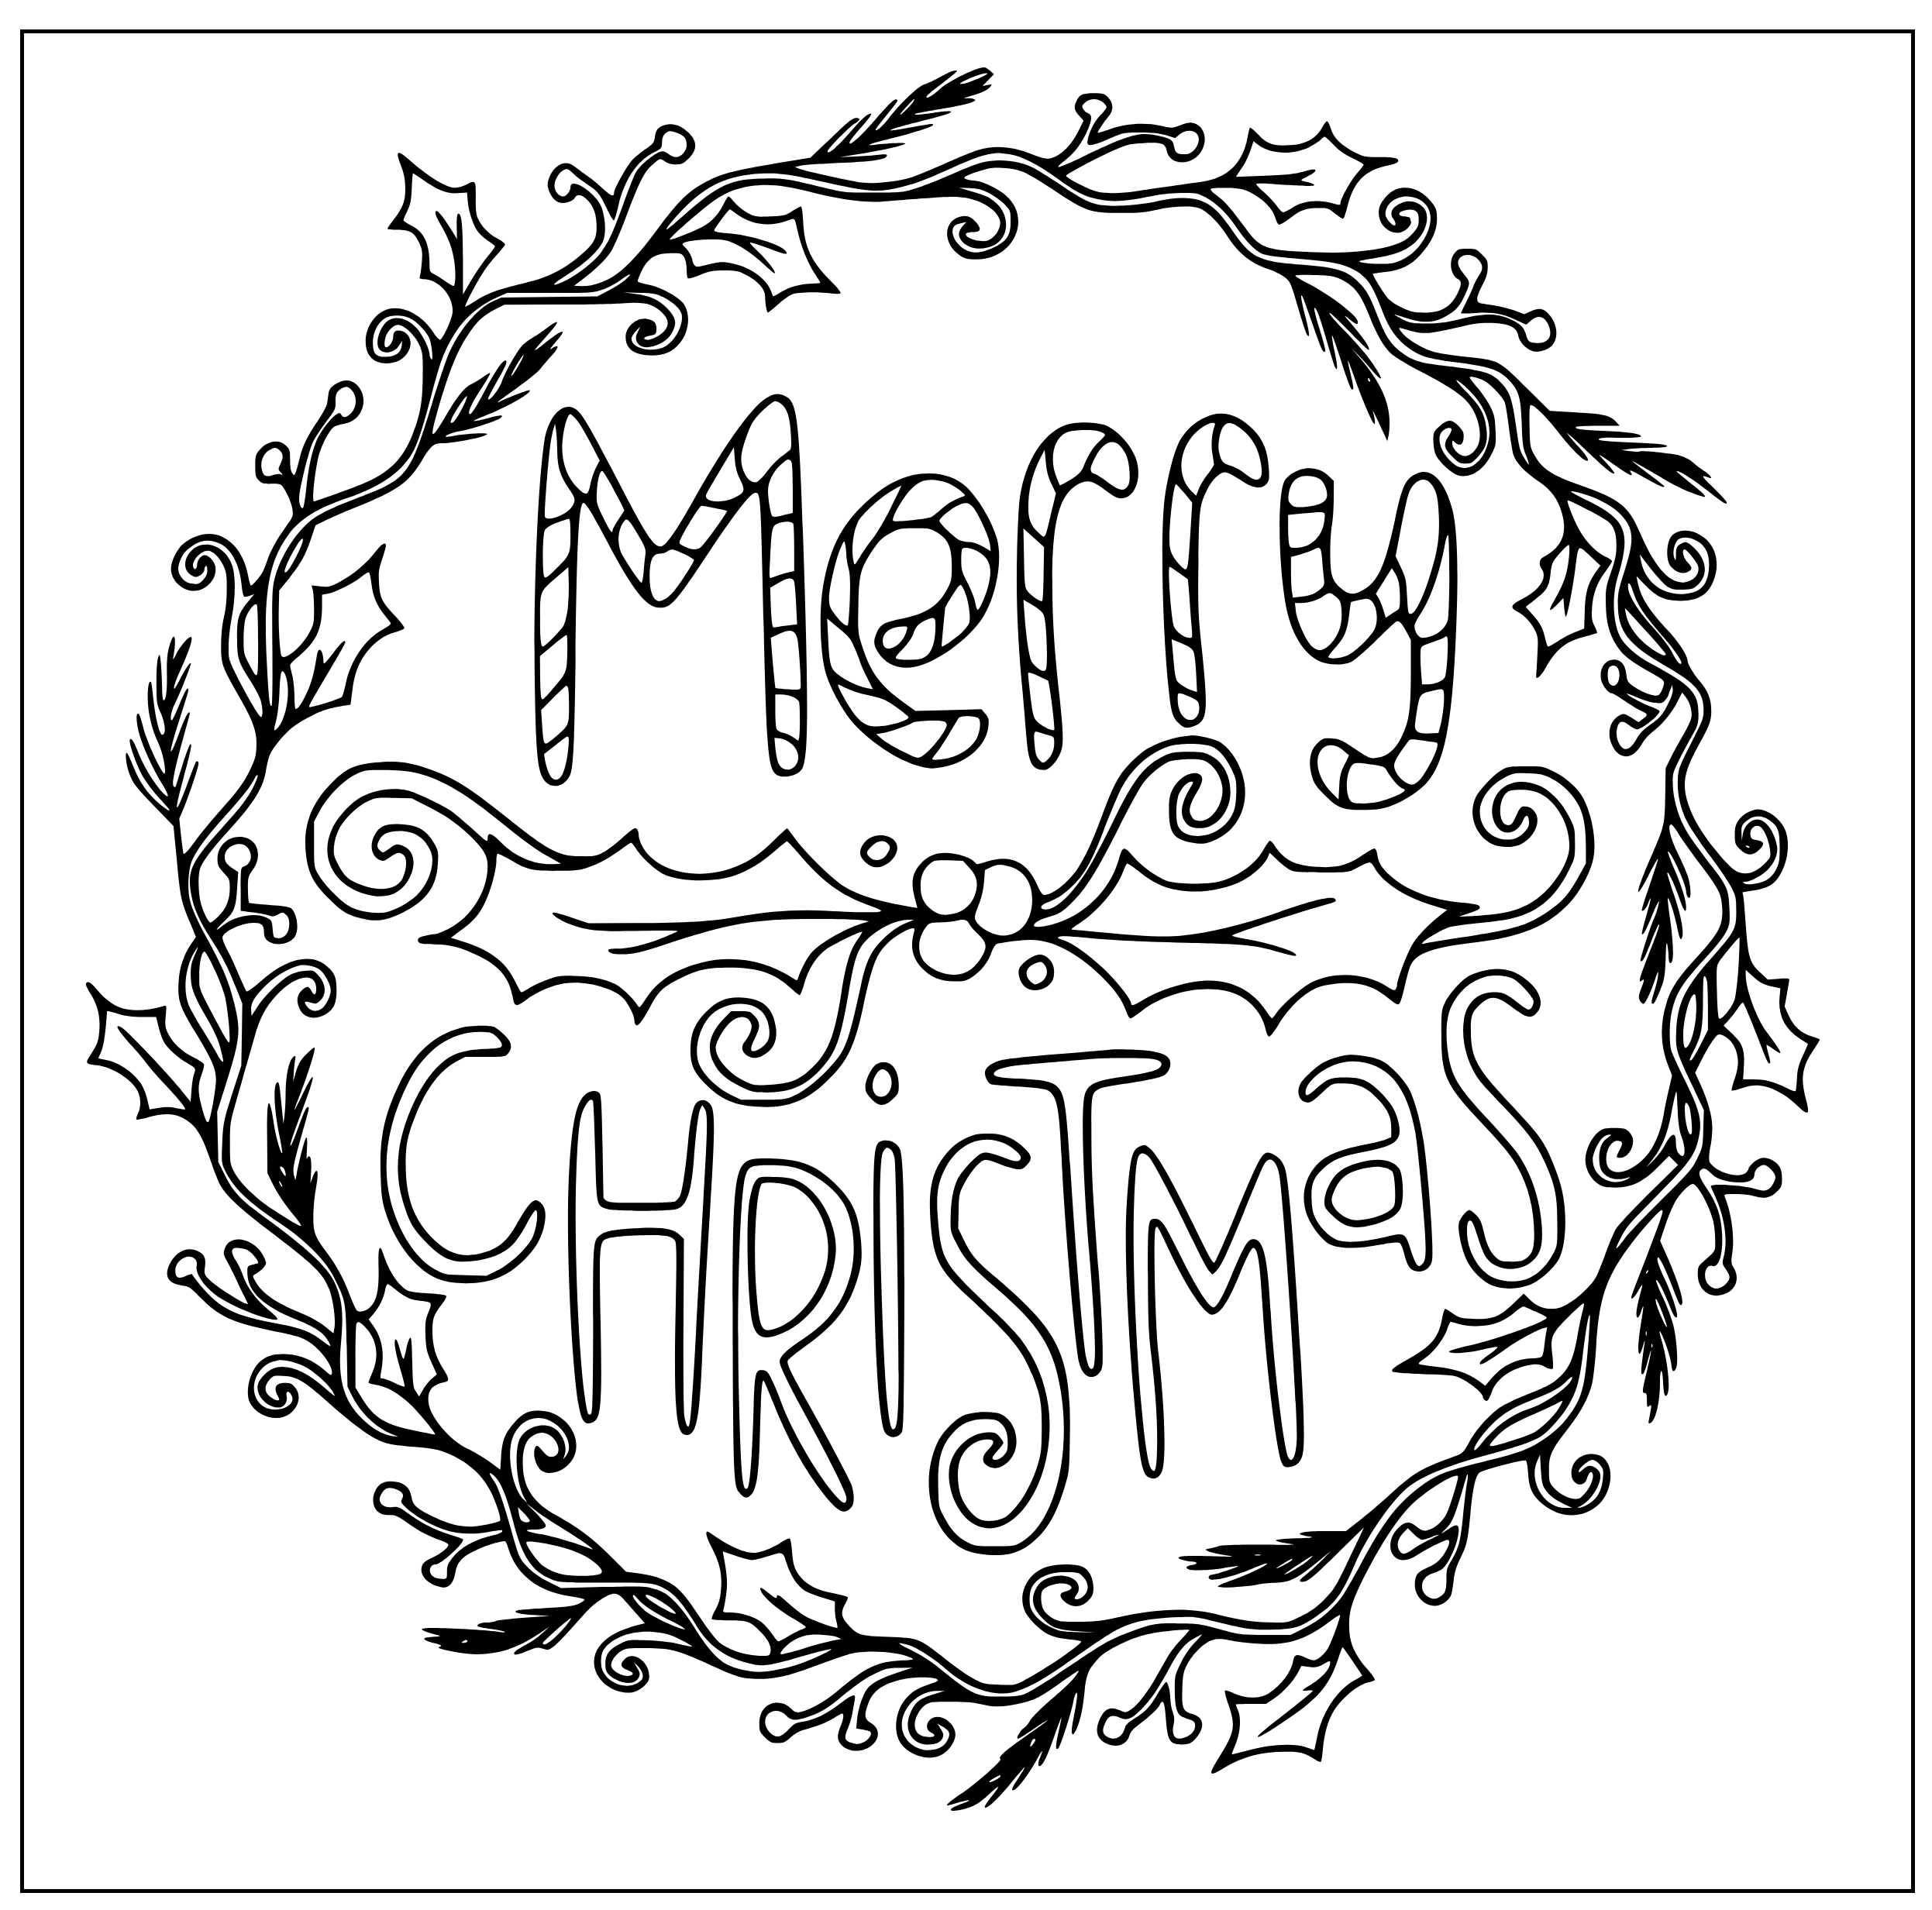 Printable Merry Christmas Wreath Coloring Page for kids.